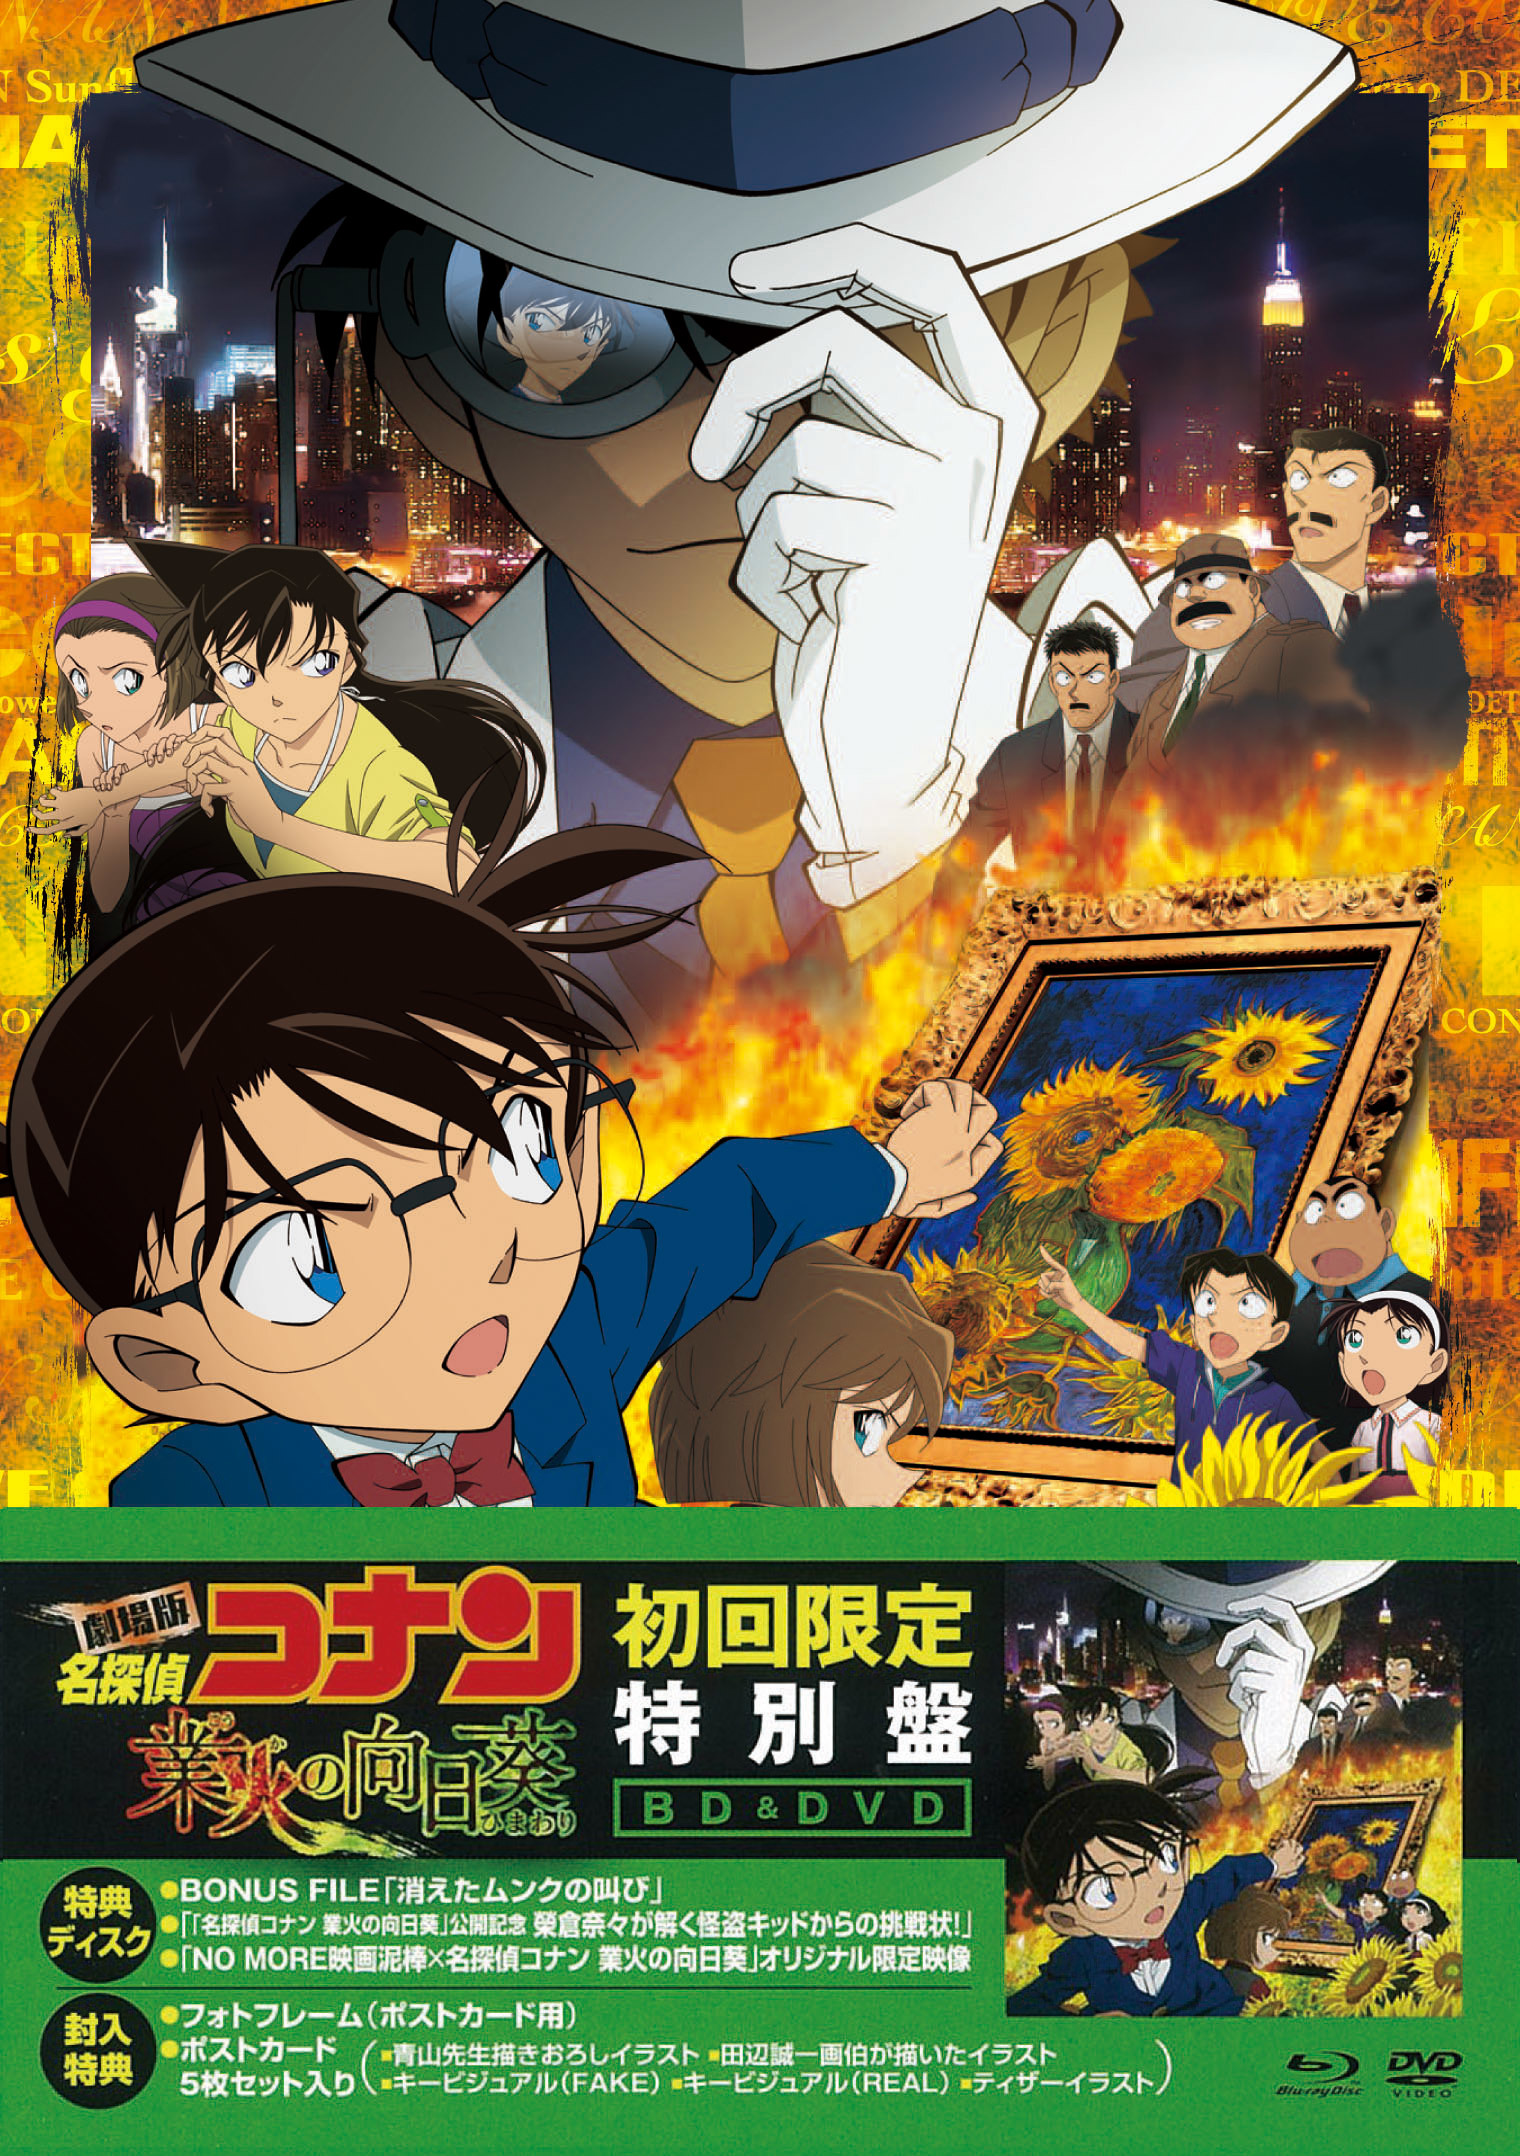 Detective Conan Sunflowers Of Inferno Blu Ray Release Date November 25 15 First Press Limited Edition 劇場版 名探偵コナン 業火の向日葵 Japan